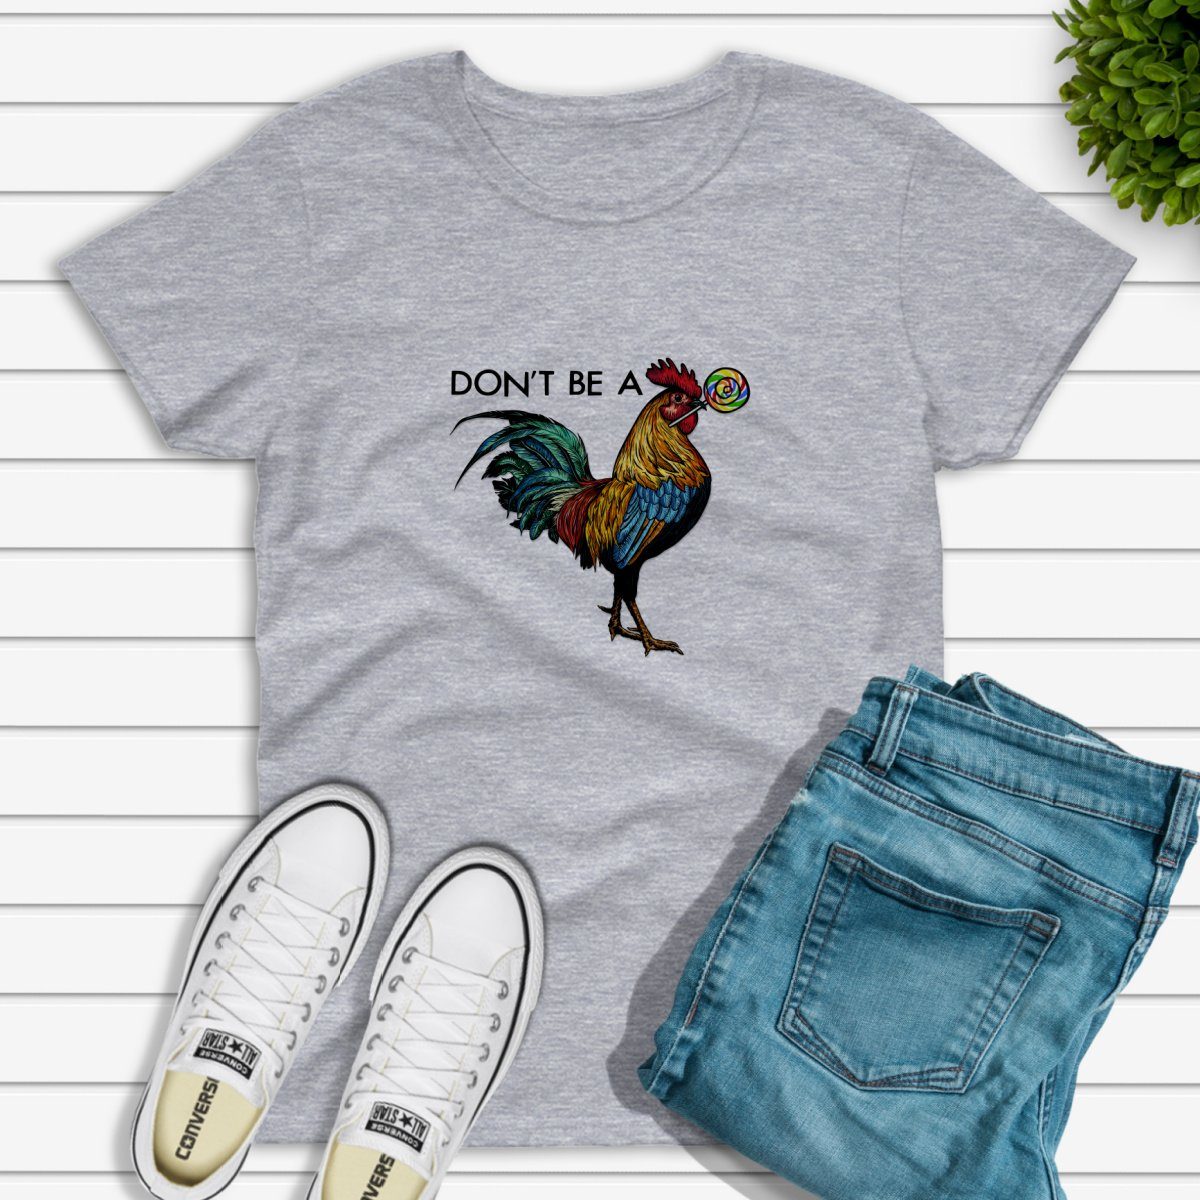 Don't be a Rooster Lollipop Shirt The Teal Bandit 